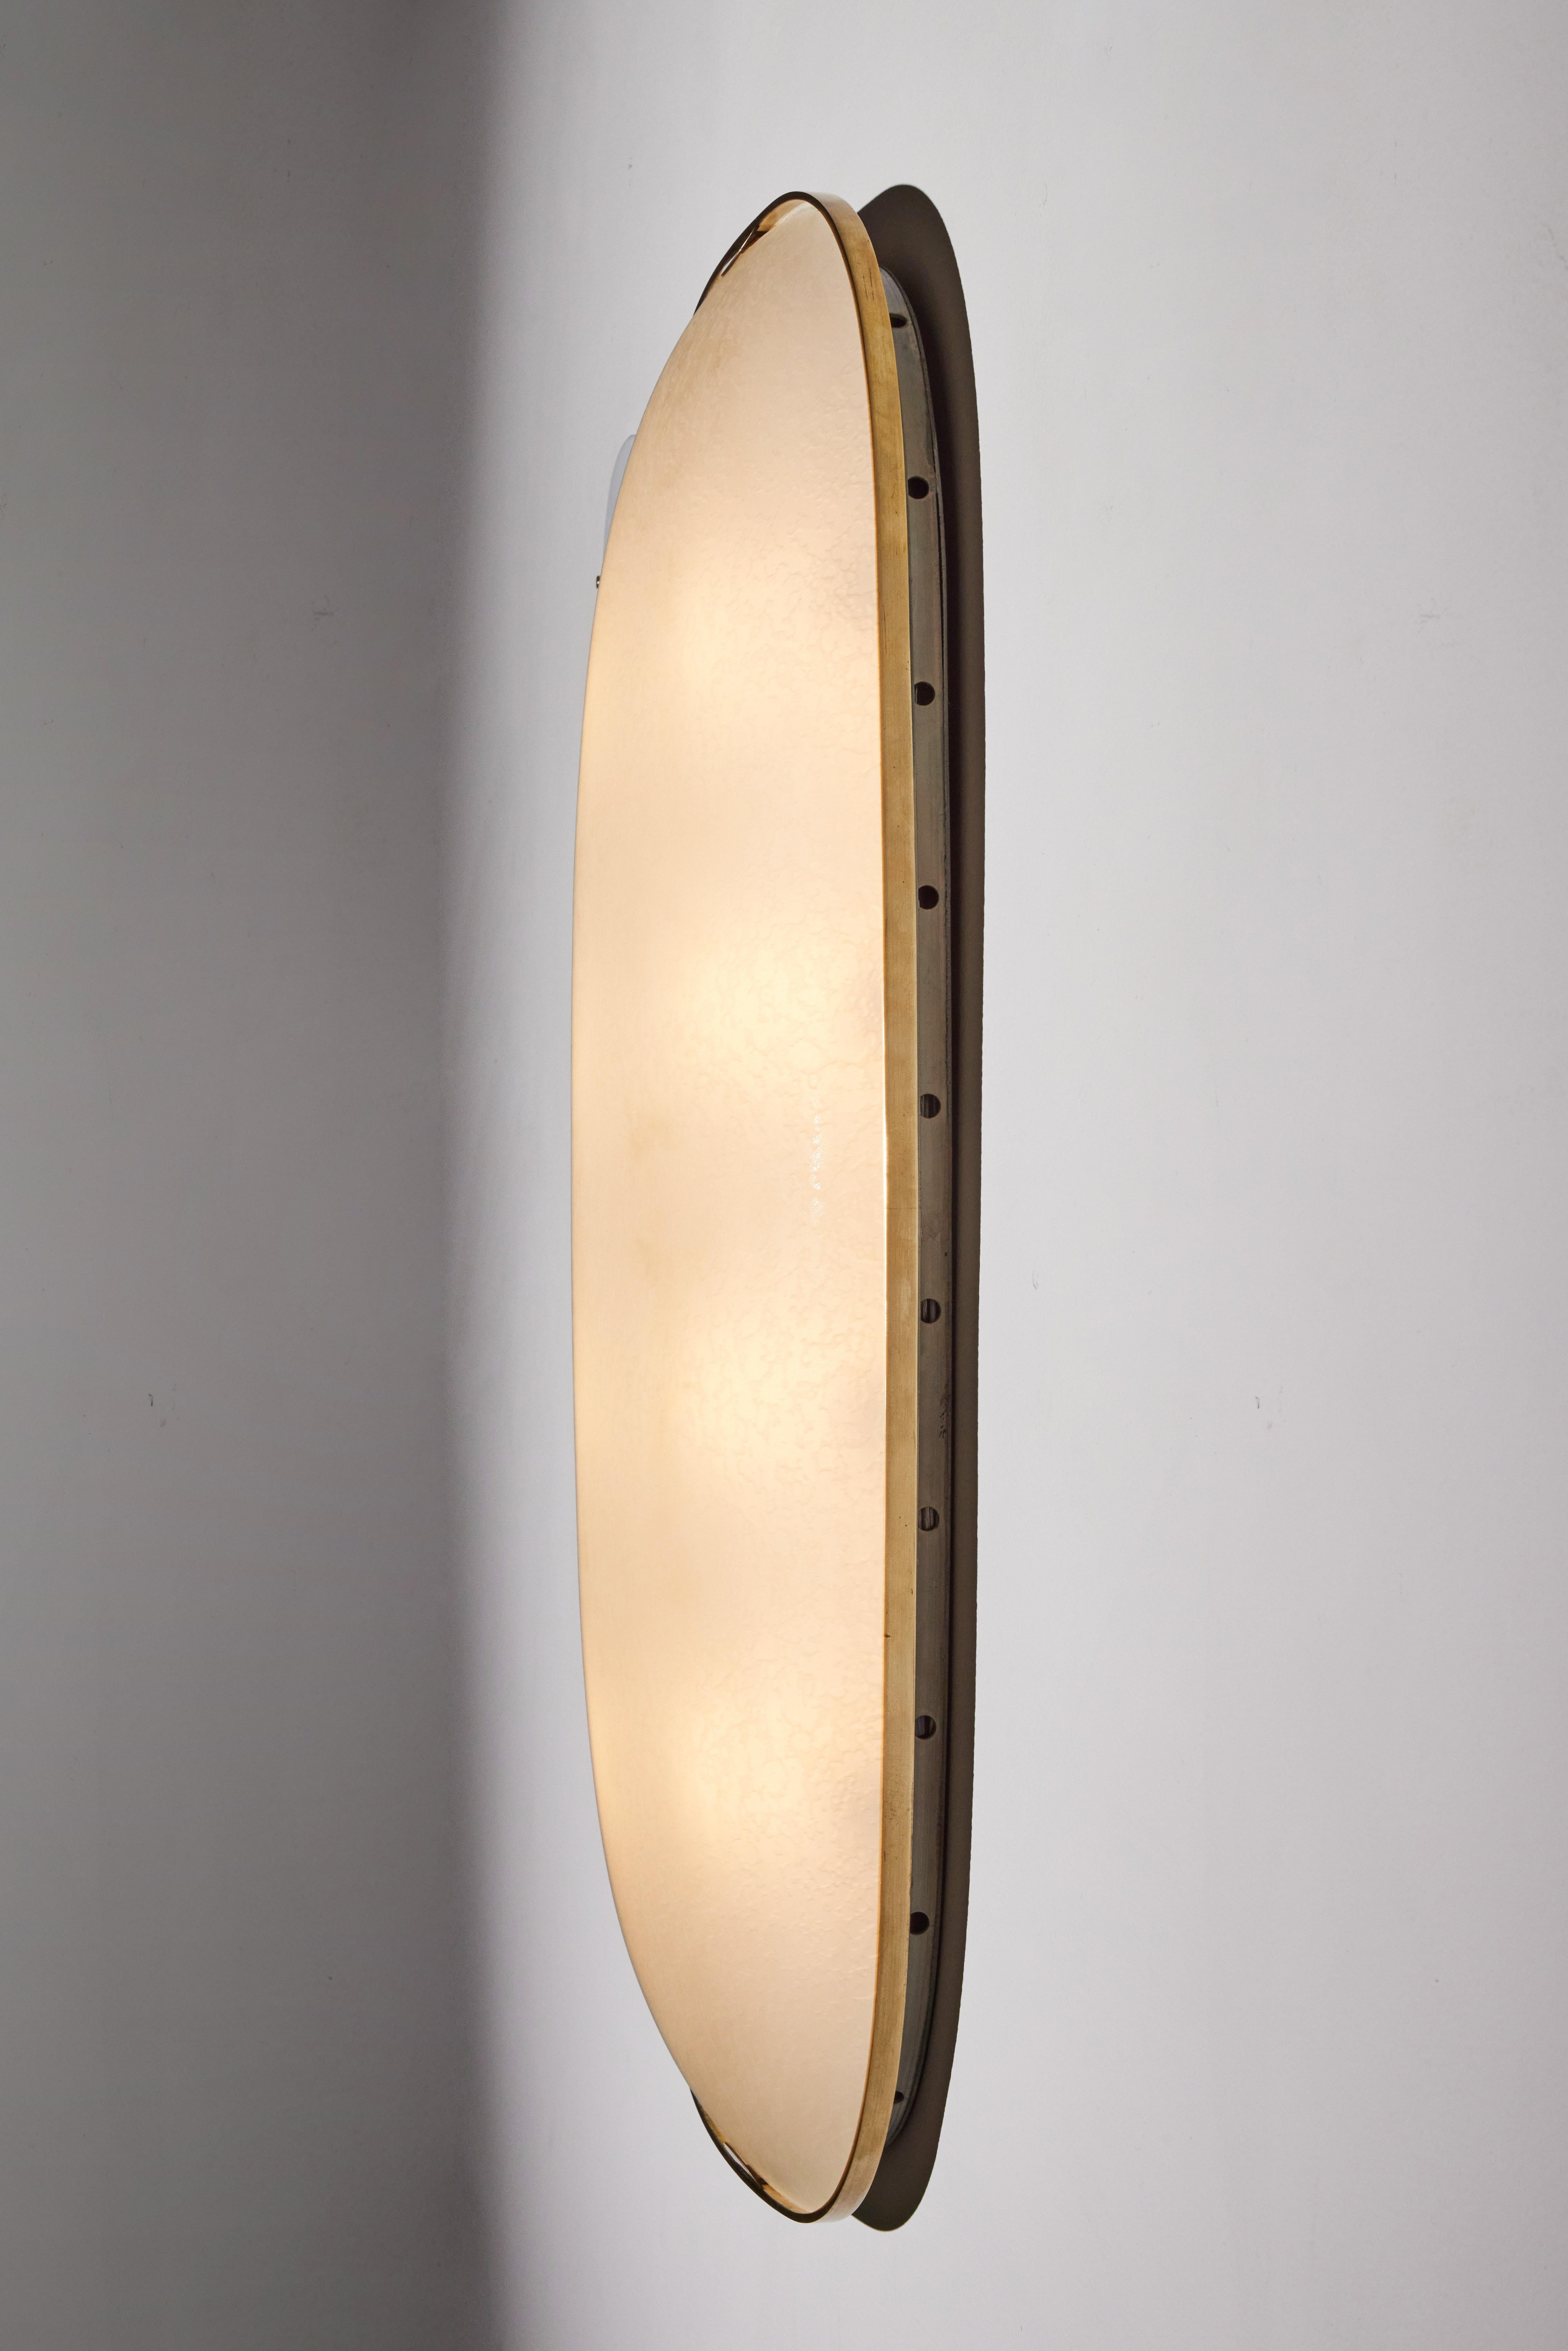 Mid-20th Century Large Flush Mount Wall /Ceiling Light by Fontana Arte